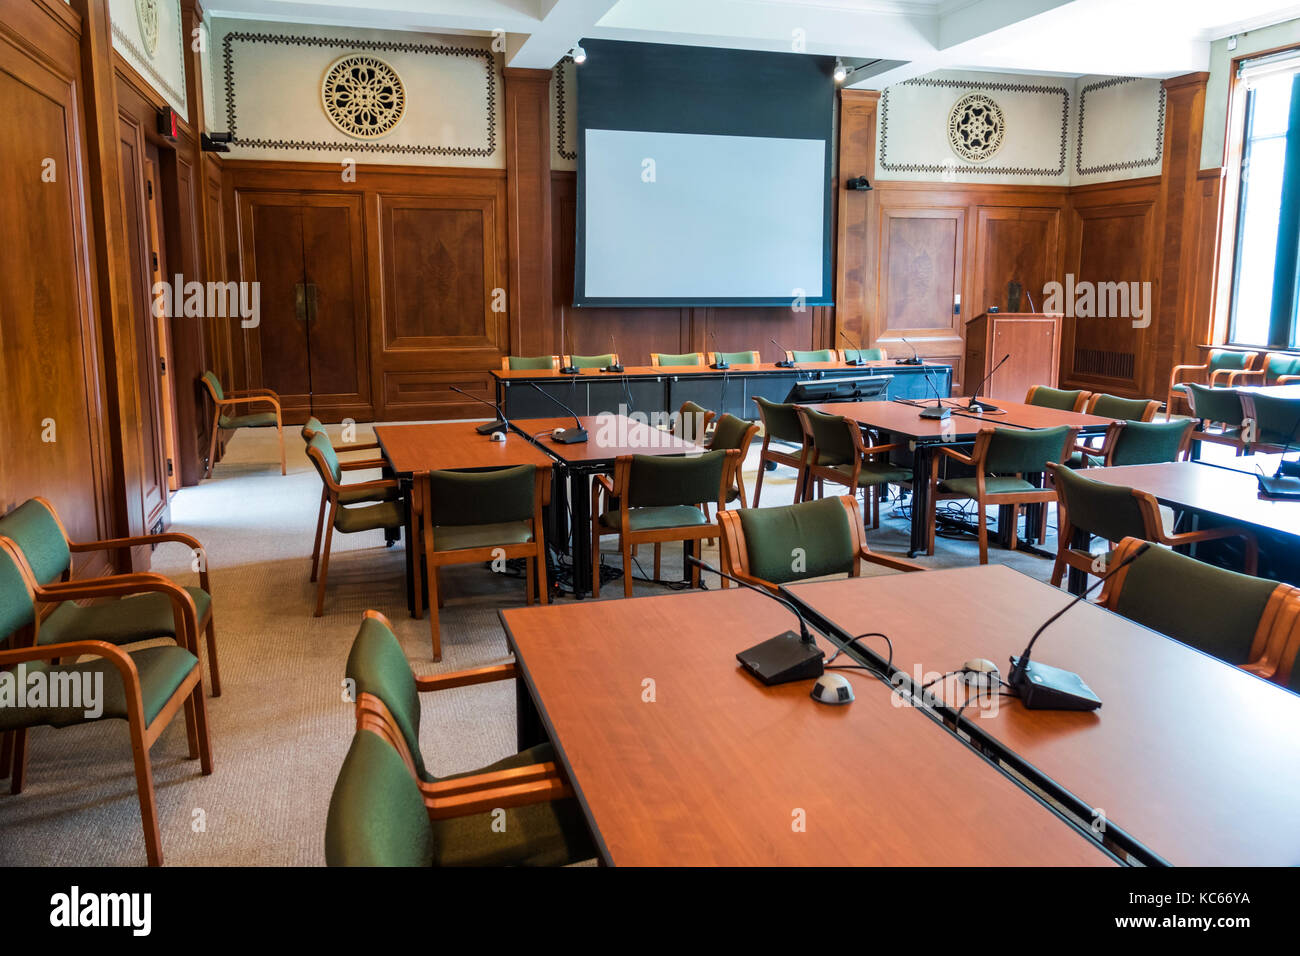 Washington DC,National Mall,National Academy of Science,NAS,Lecture Room,desks,interior inside,DC170527046 Stock Photo